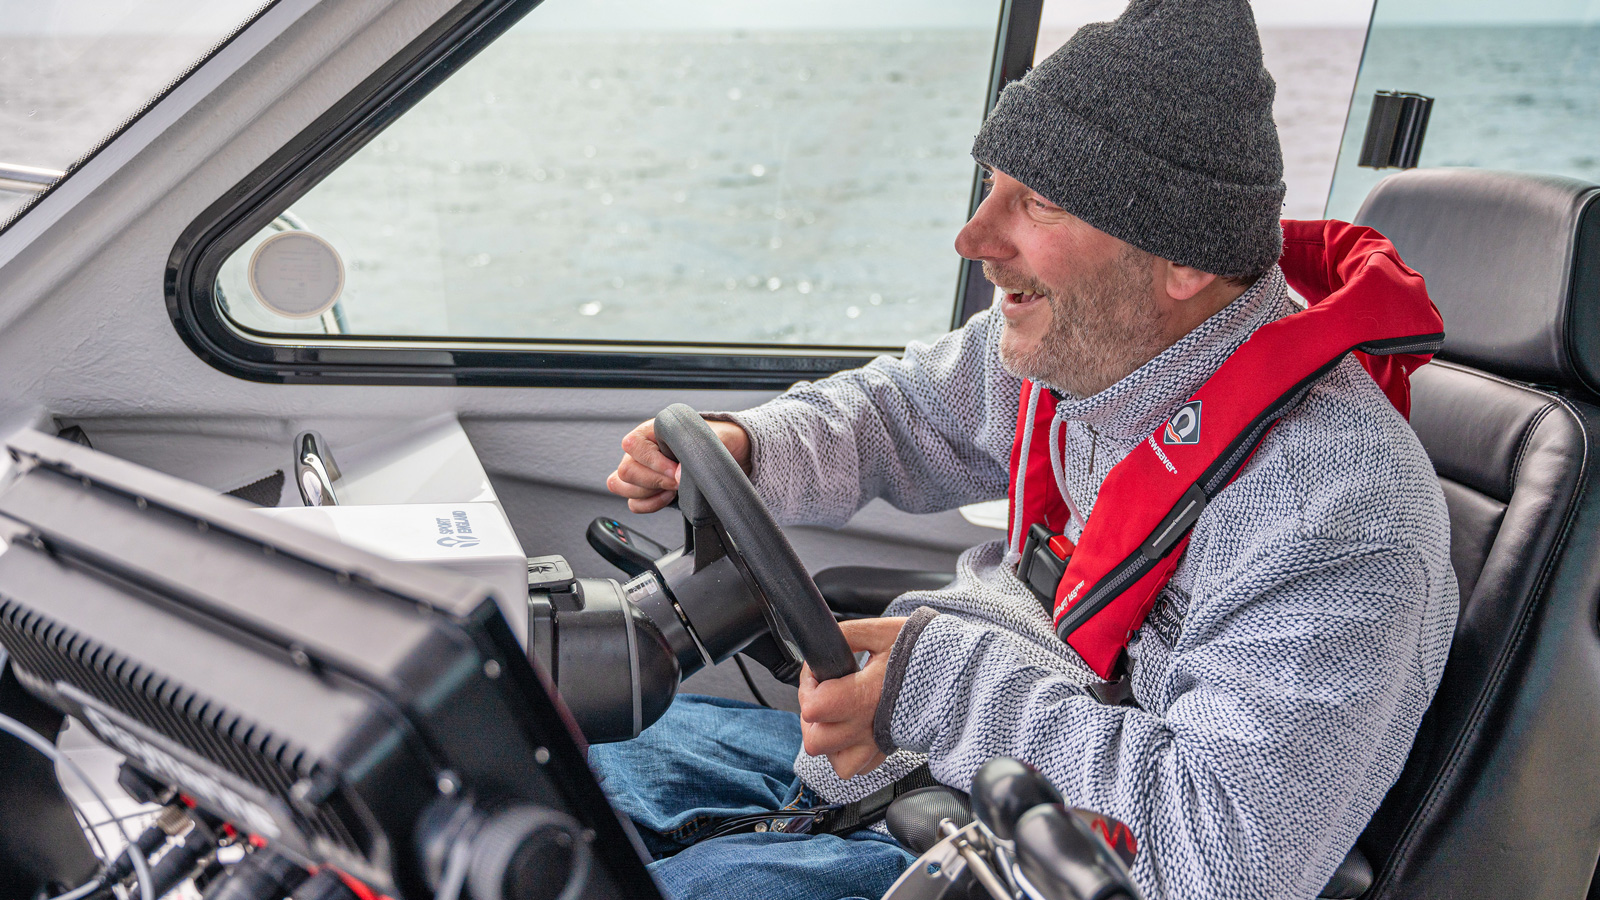 Steven Webb piloting the Wetwheels boat in Cornwall and having a great time in his electric wheelchair